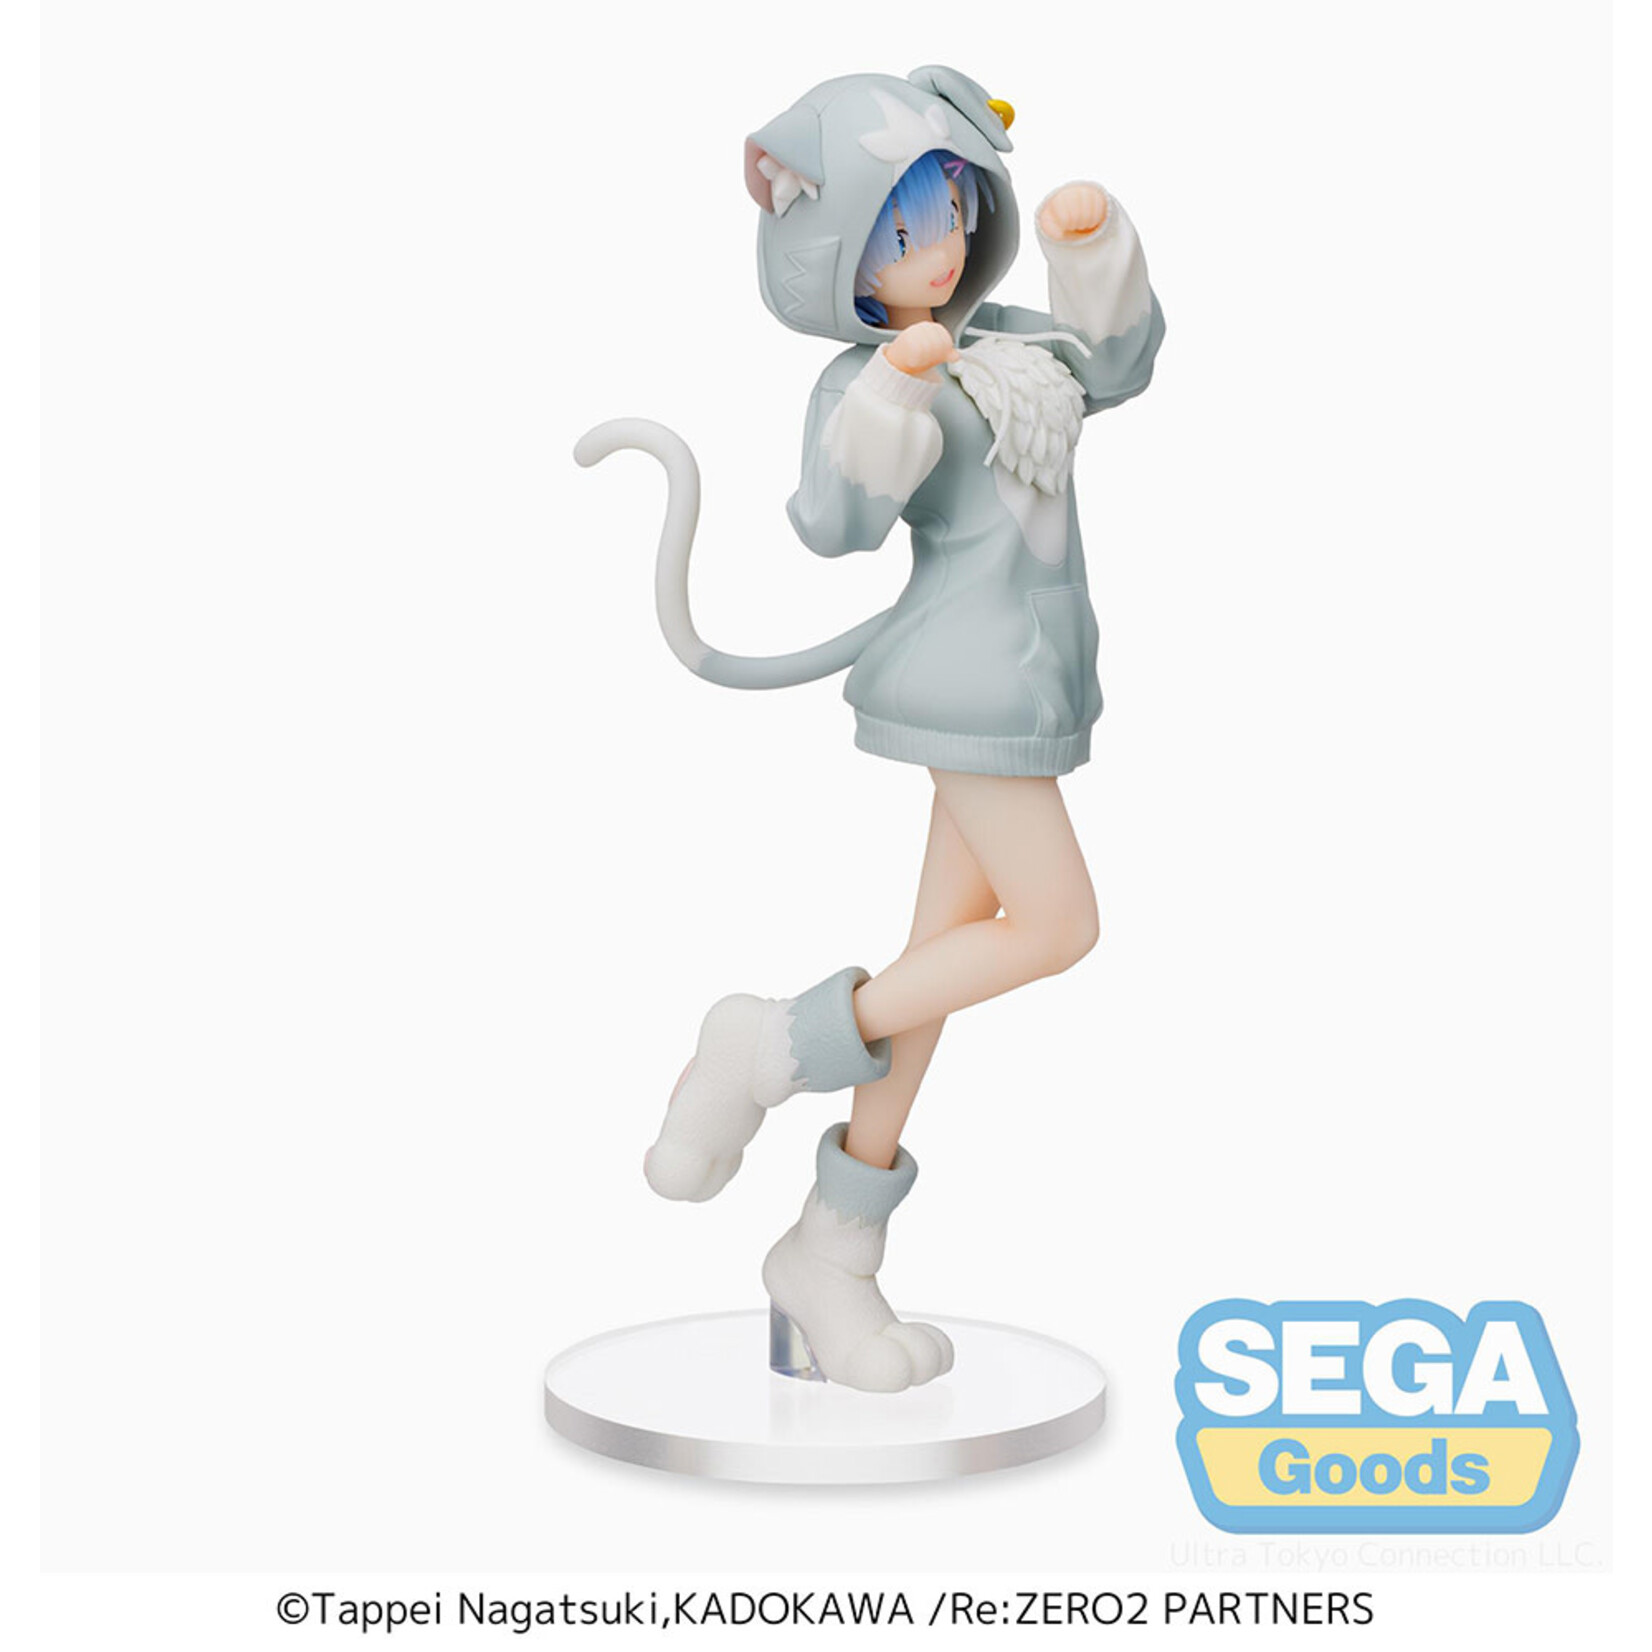 Re:ZERO -Starting Life in Another World- SPM Figure "Rem" -The Great Spirit Pack-